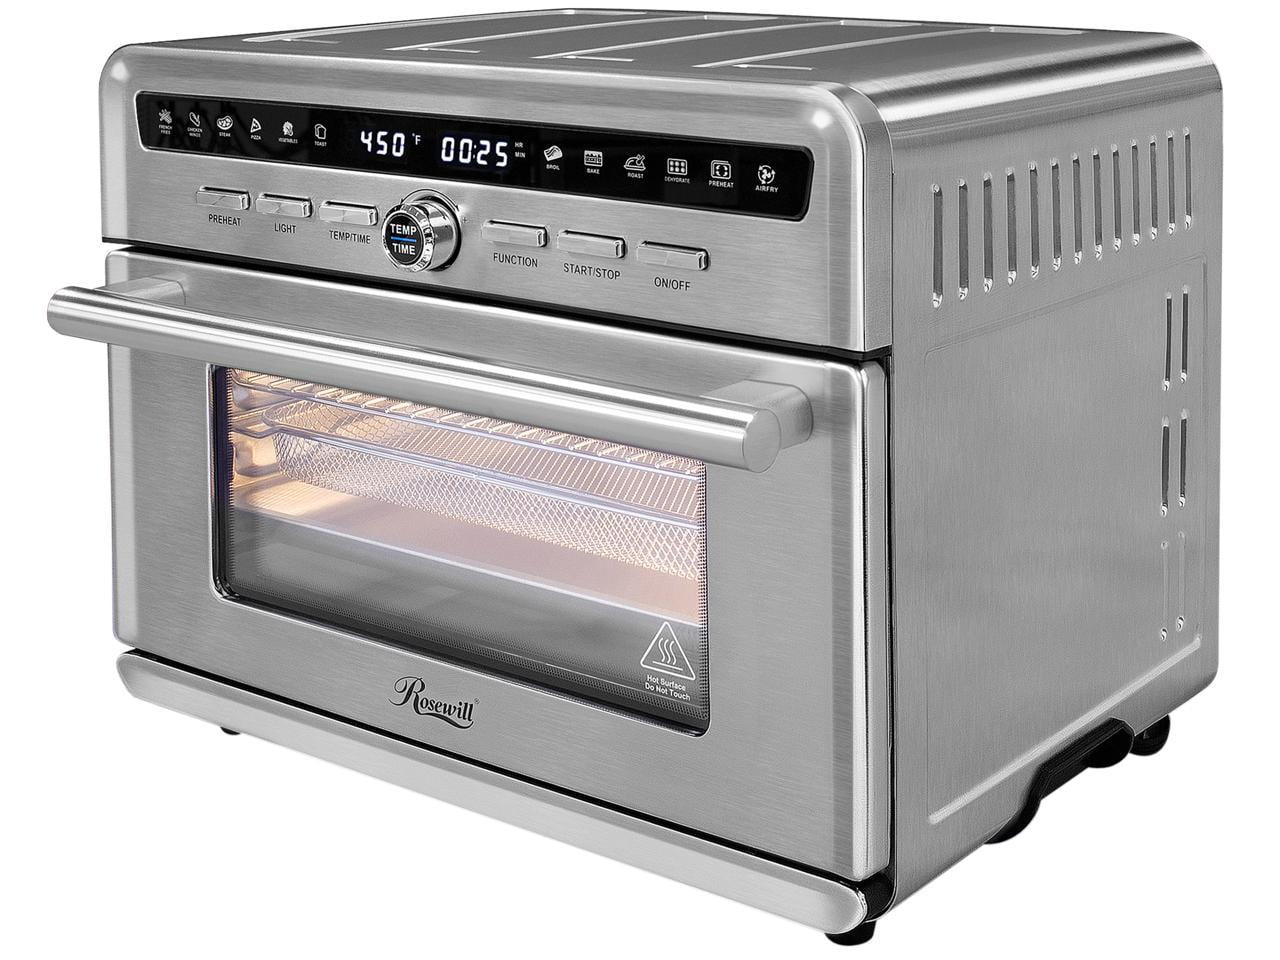 Rosewill Air Fryer Convection Toaster Oven, Stainless Steel Exterior, Famil...